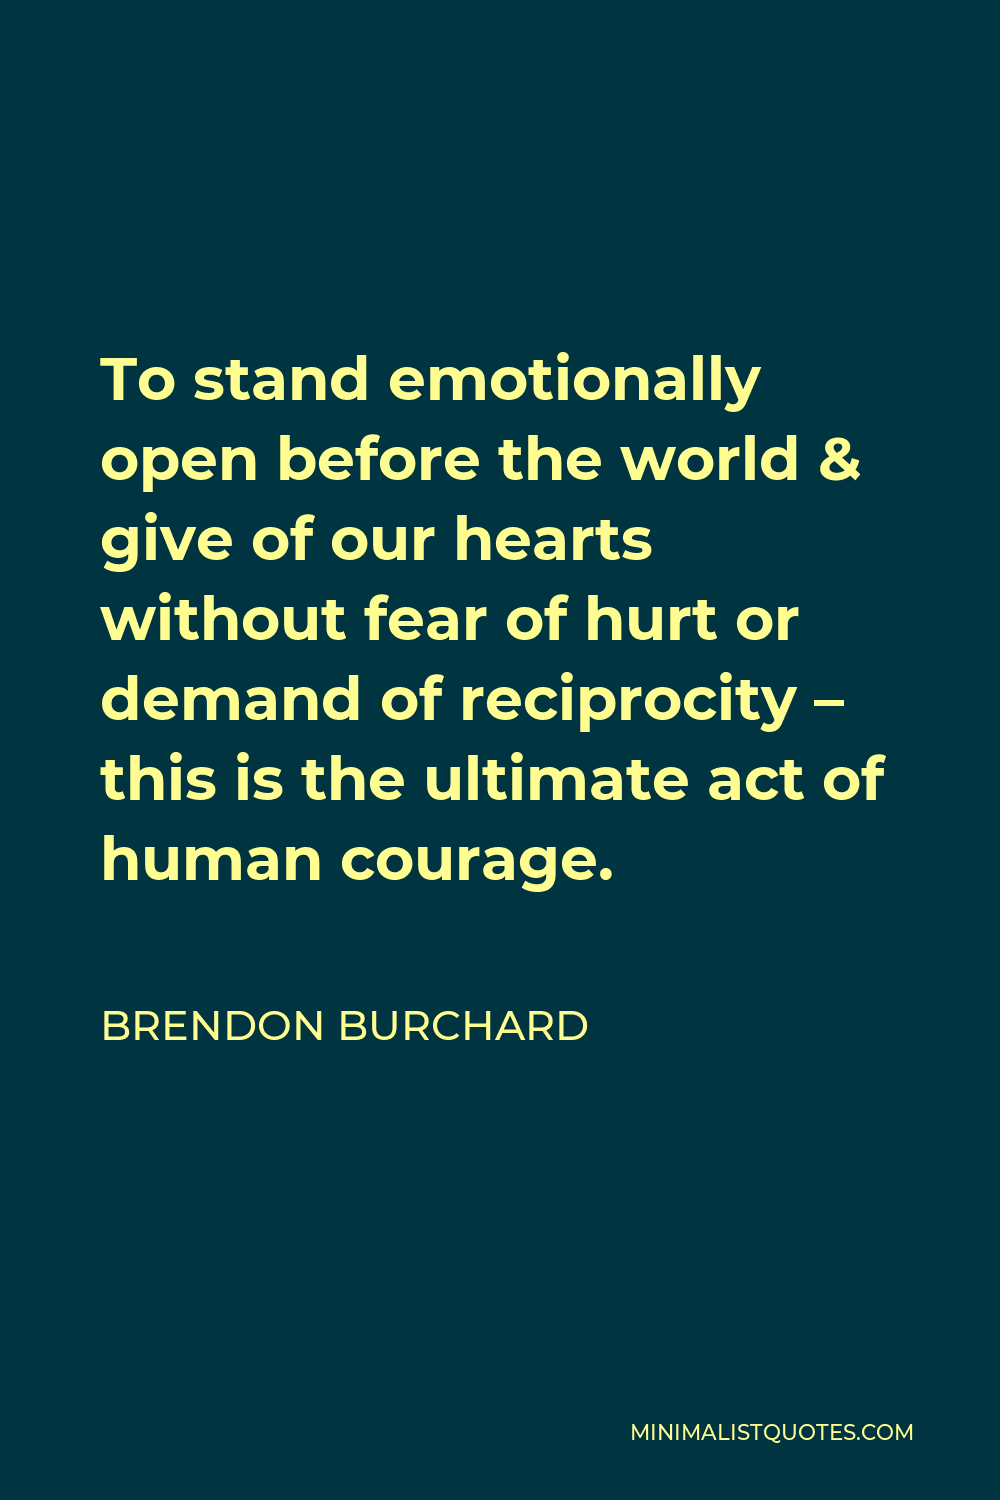 Brendon Burchard Quote - To stand emotionally open before the world & give of our hearts without fear of hurt or demand of reciprocity – this is the ultimate act of human courage.